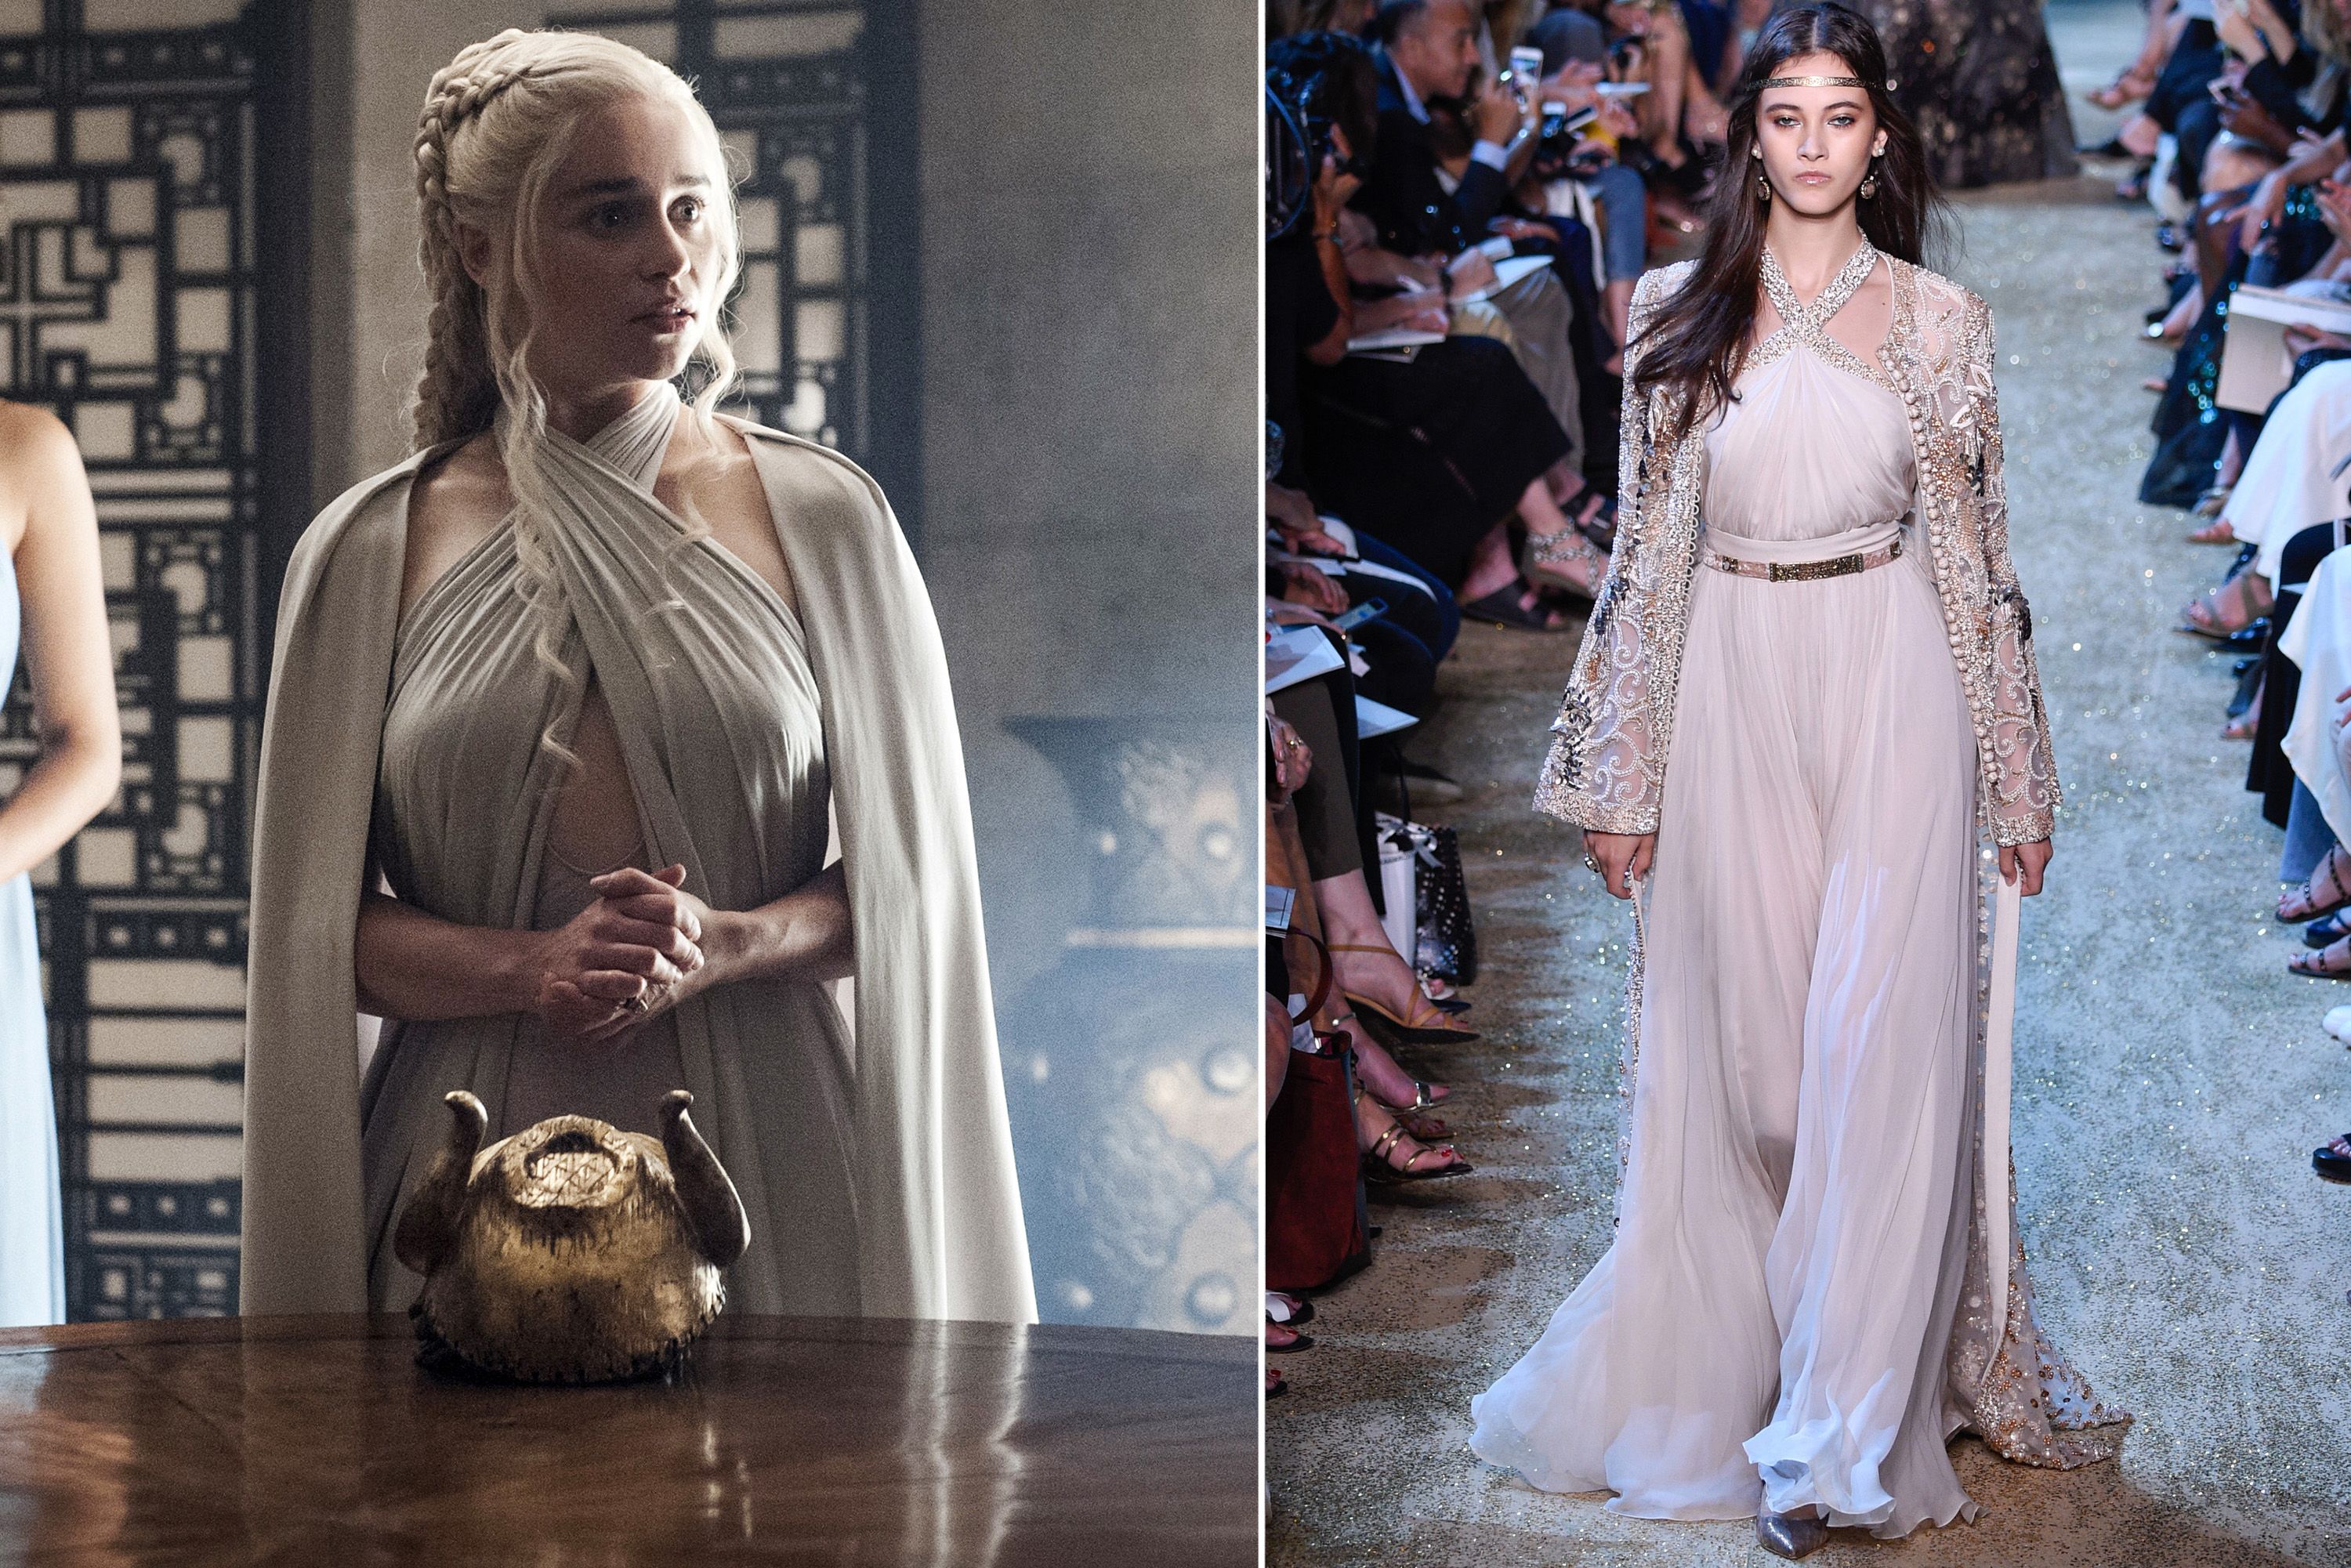 Game of Thrones'-inspired couture holds court in Paris – Boston Herald